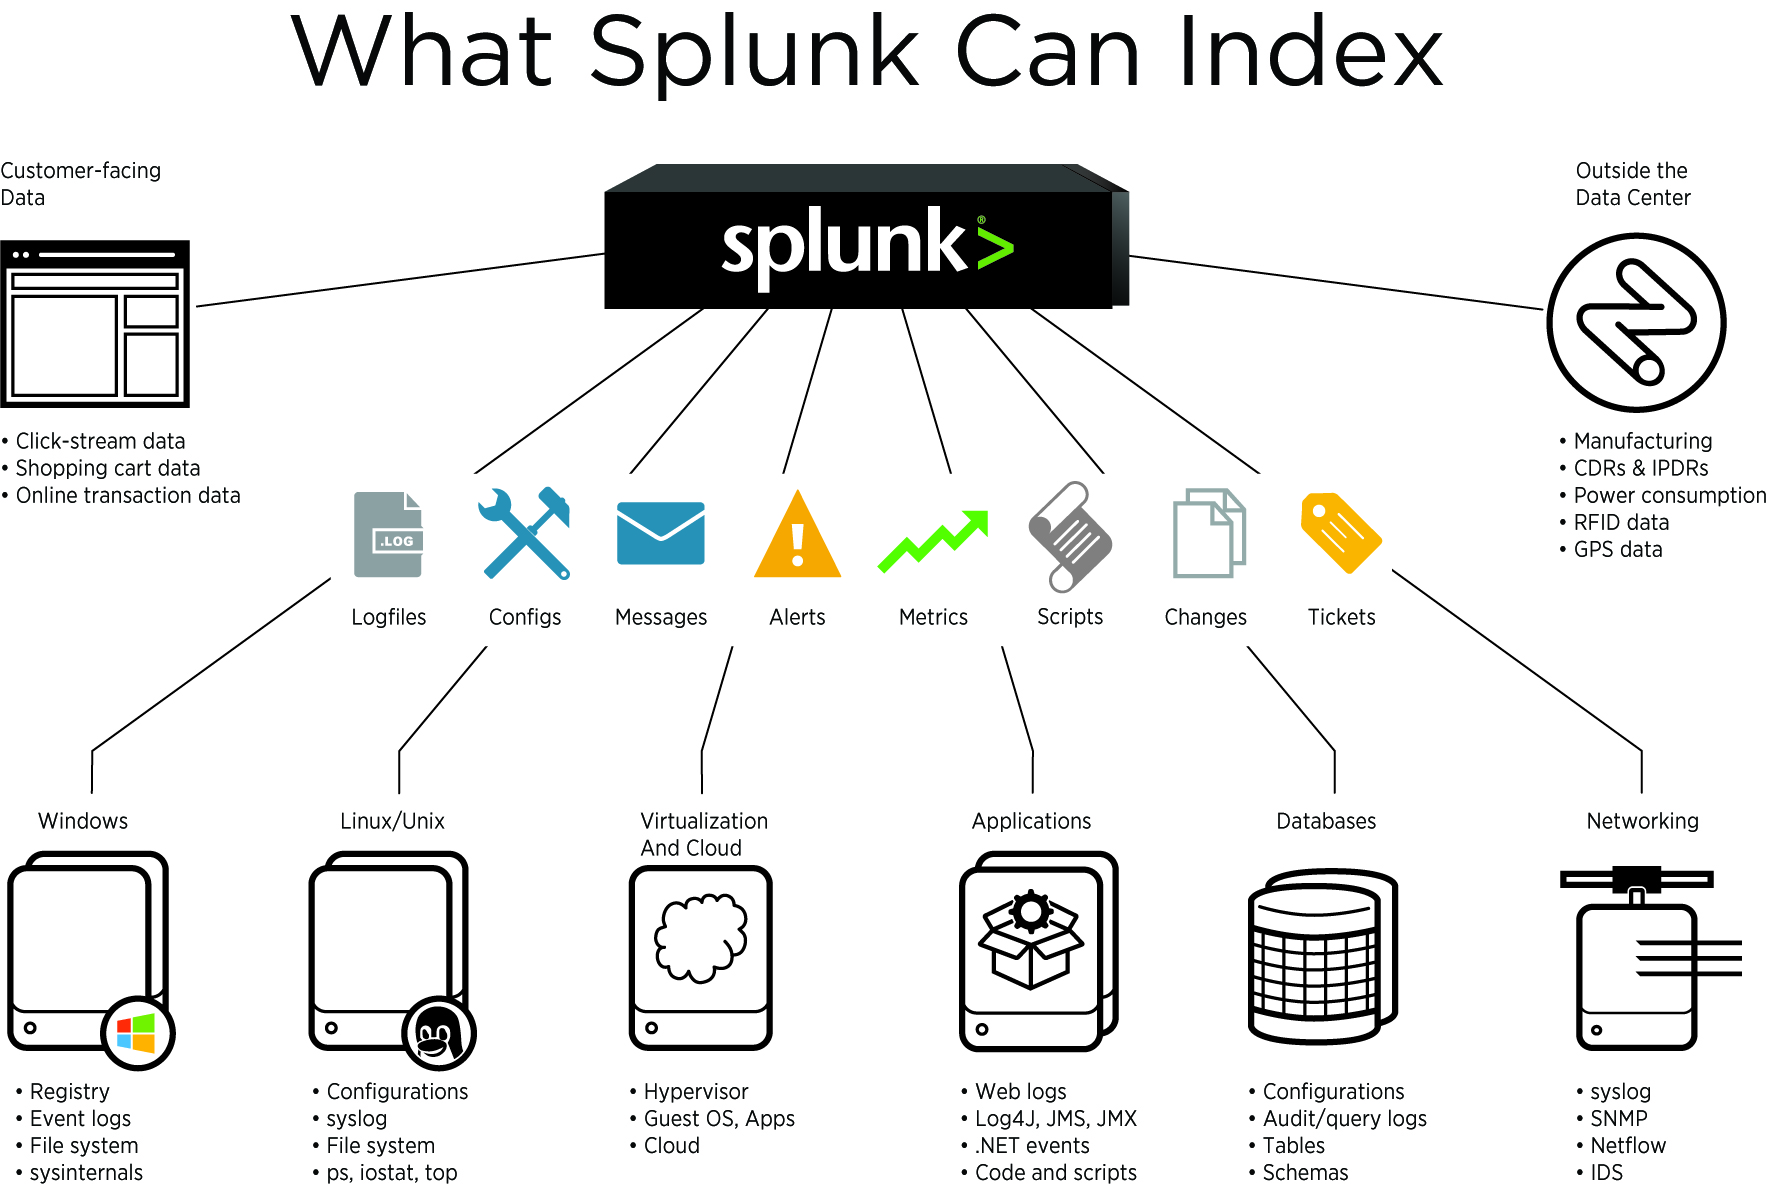 Receive expert advice on how to improve your Return On Investment from Splunk